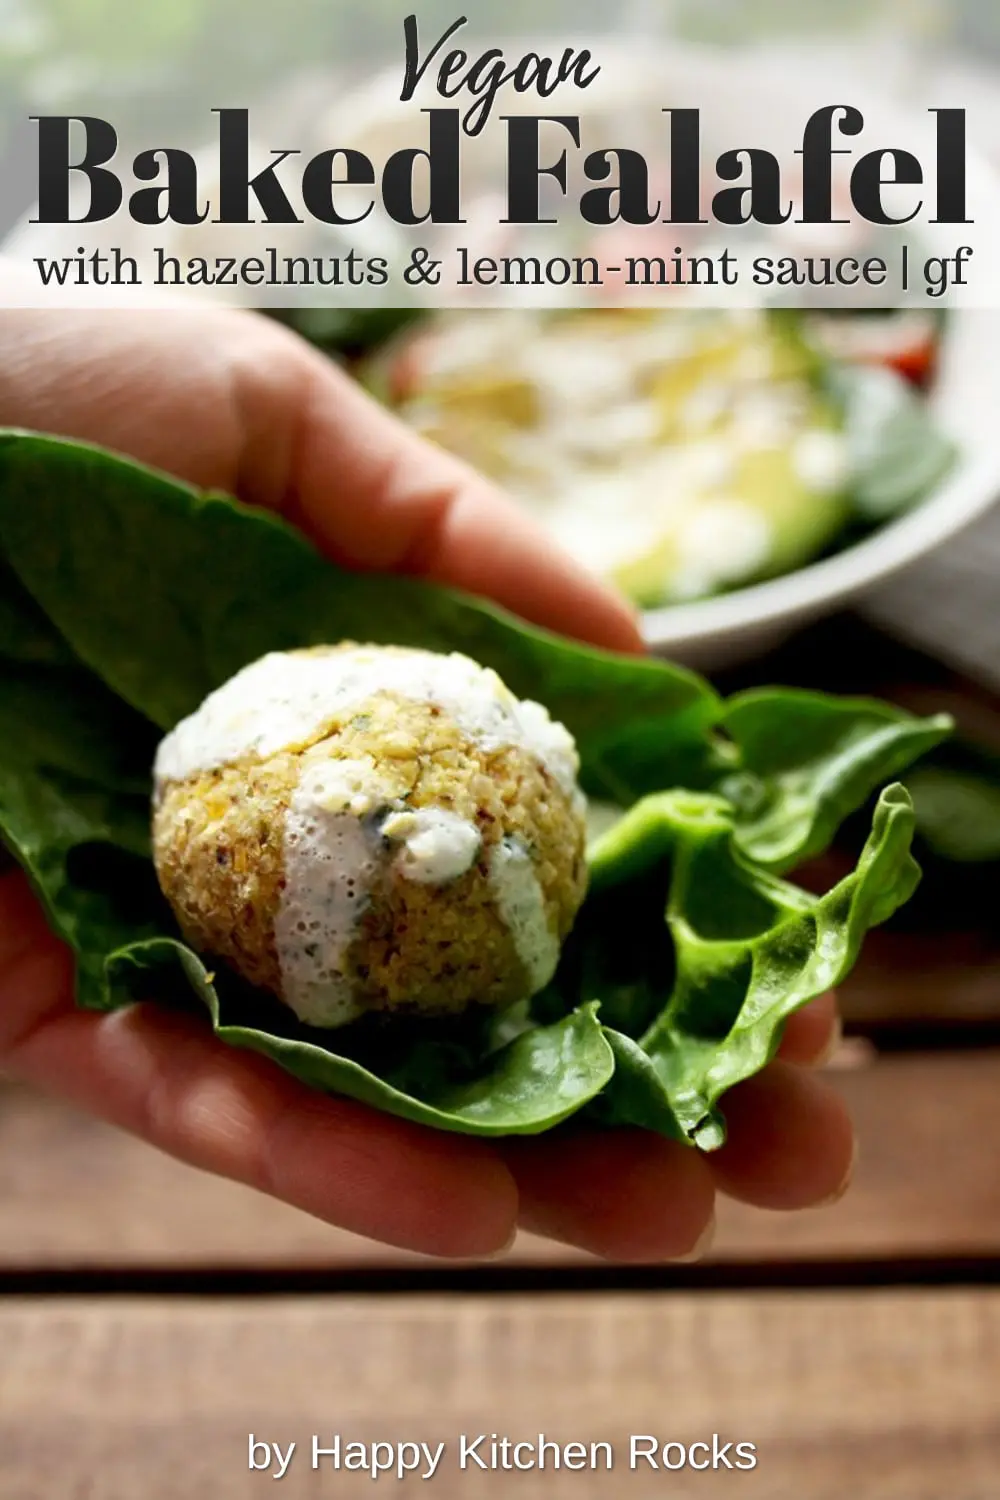 Crispy Baked Falafel with Hazelnuts and Creamy Lemon-Mint Sauce Hand Collage with Text Overlay